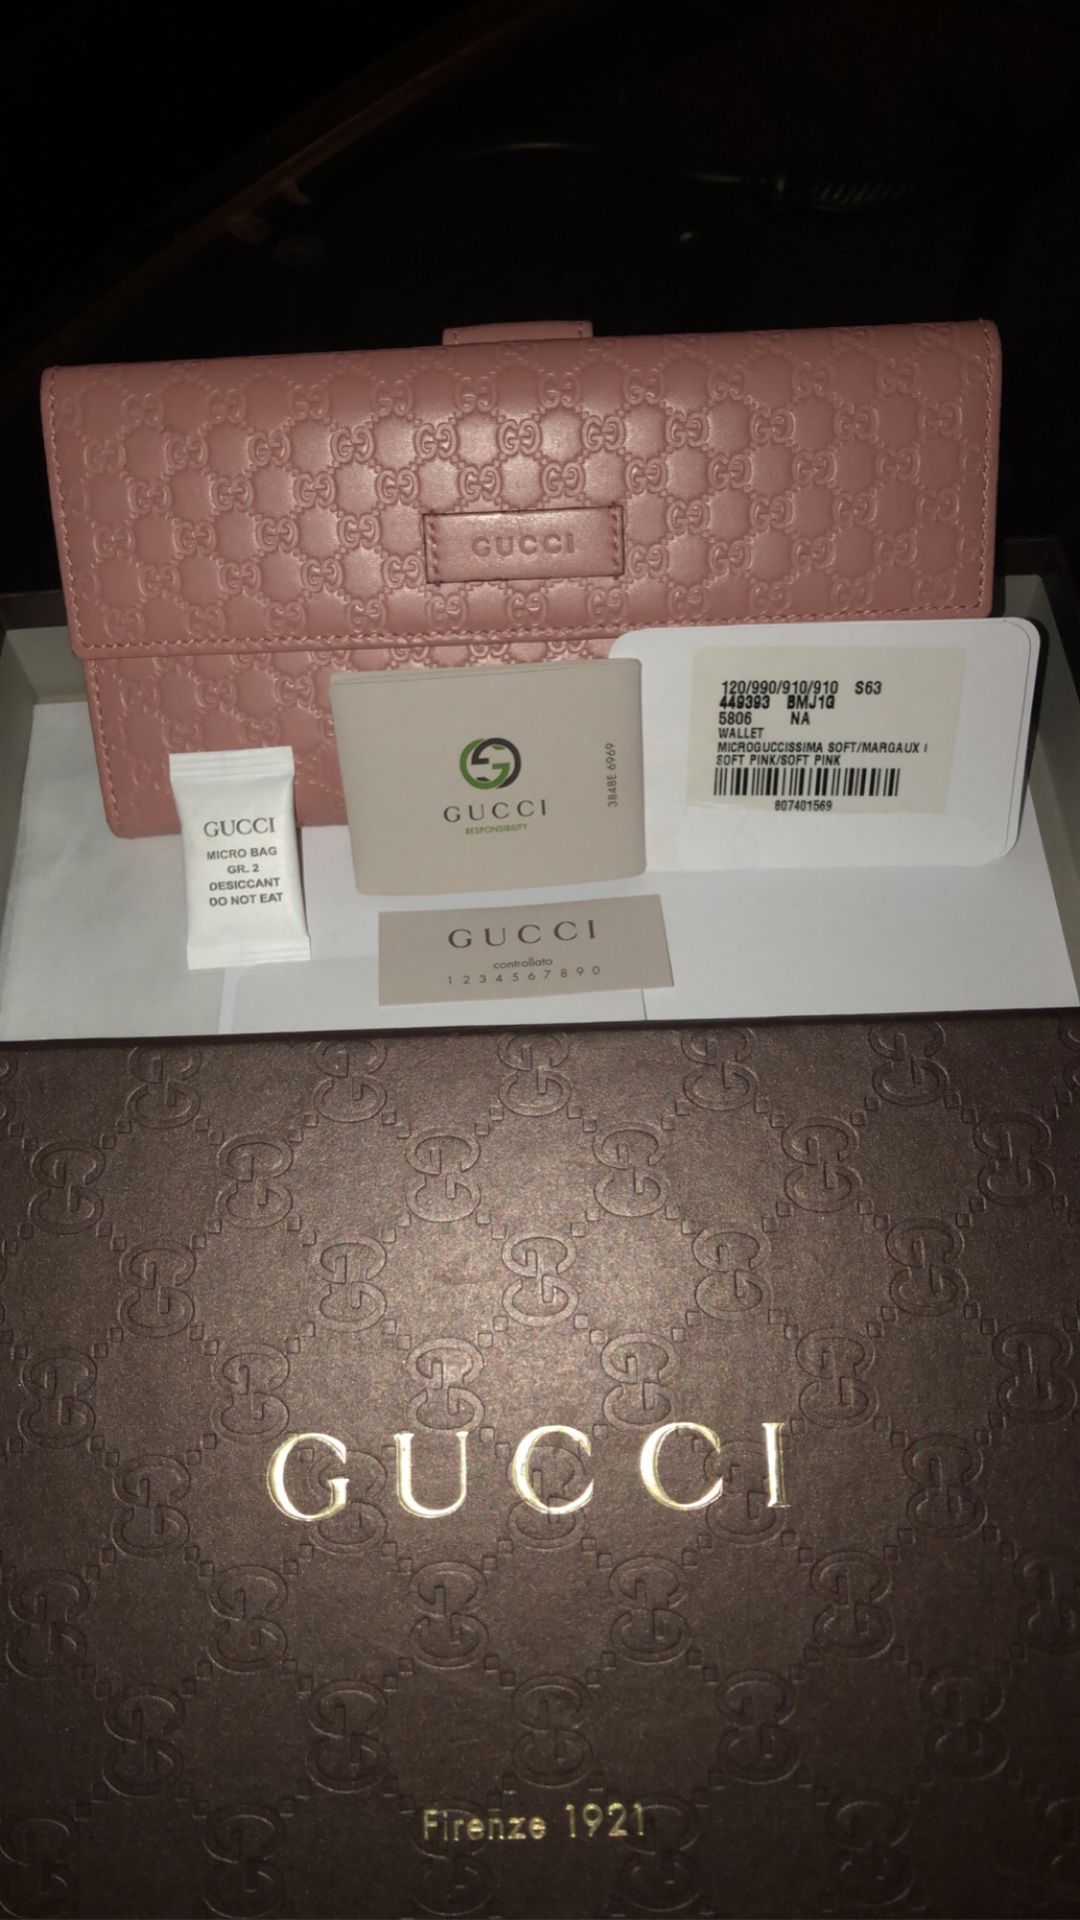 Gucci Women's Soft Pink GG Microguccissima Continental Wallet **Brand new** List price is $695